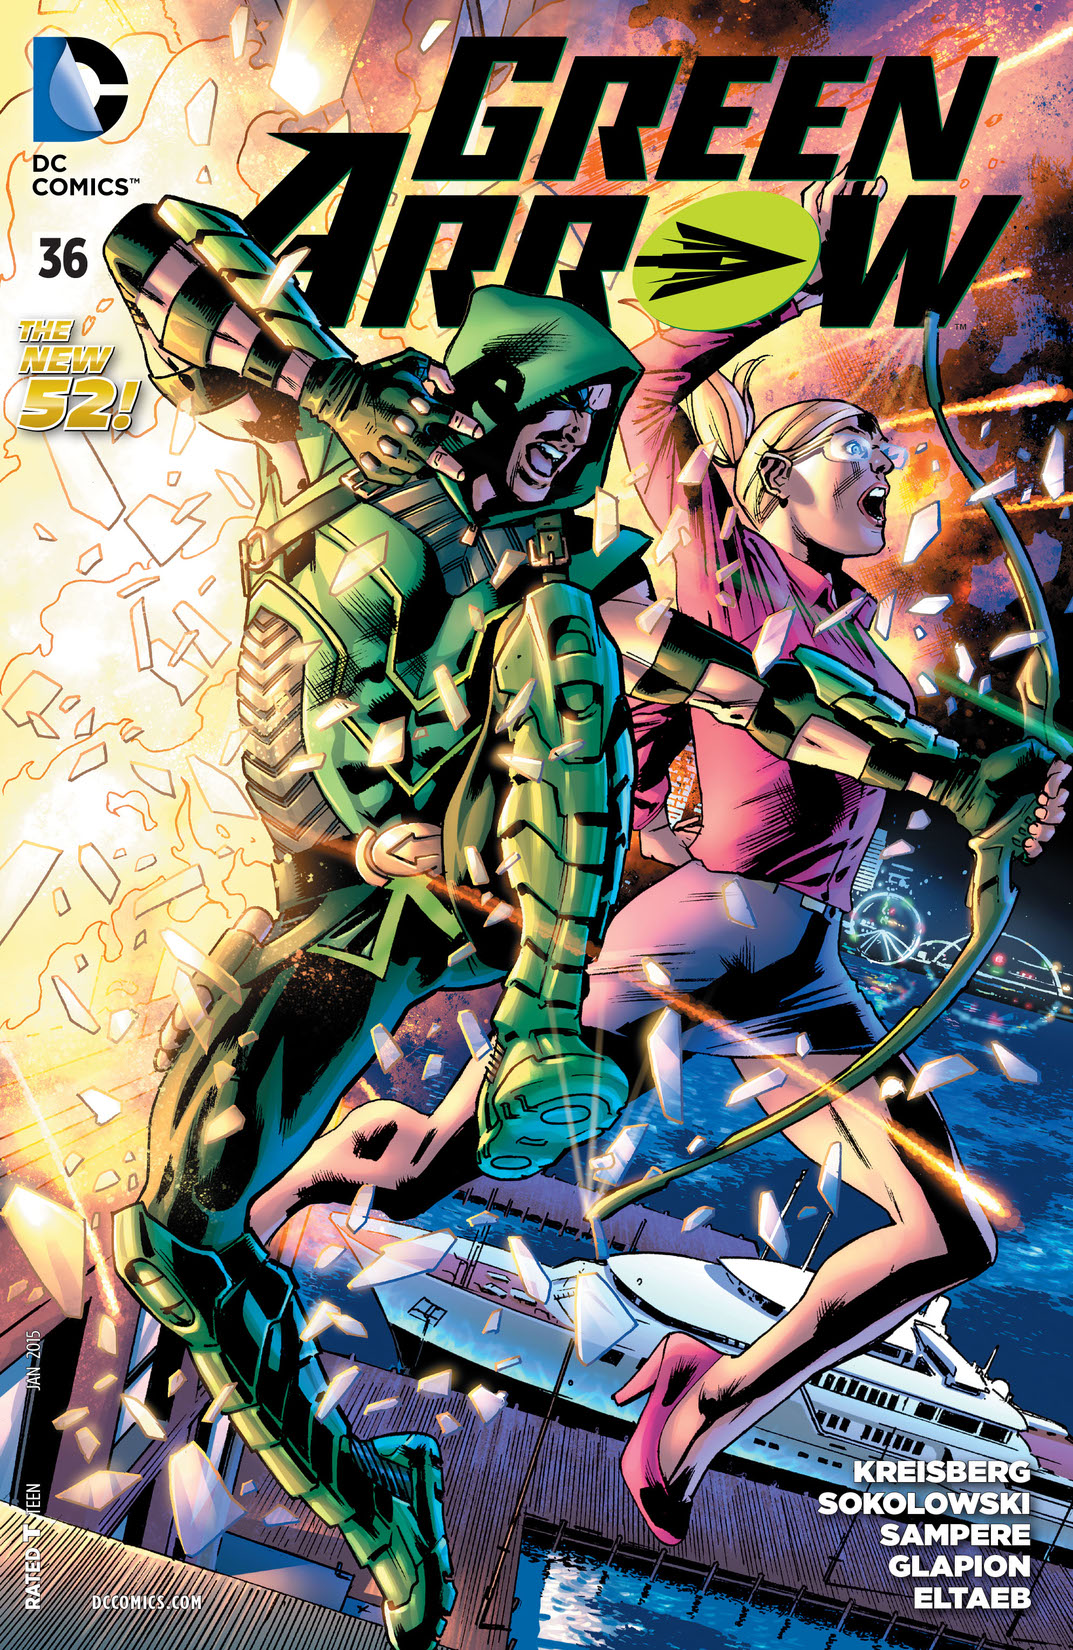 Green Arrow (2011-) #36 preview images